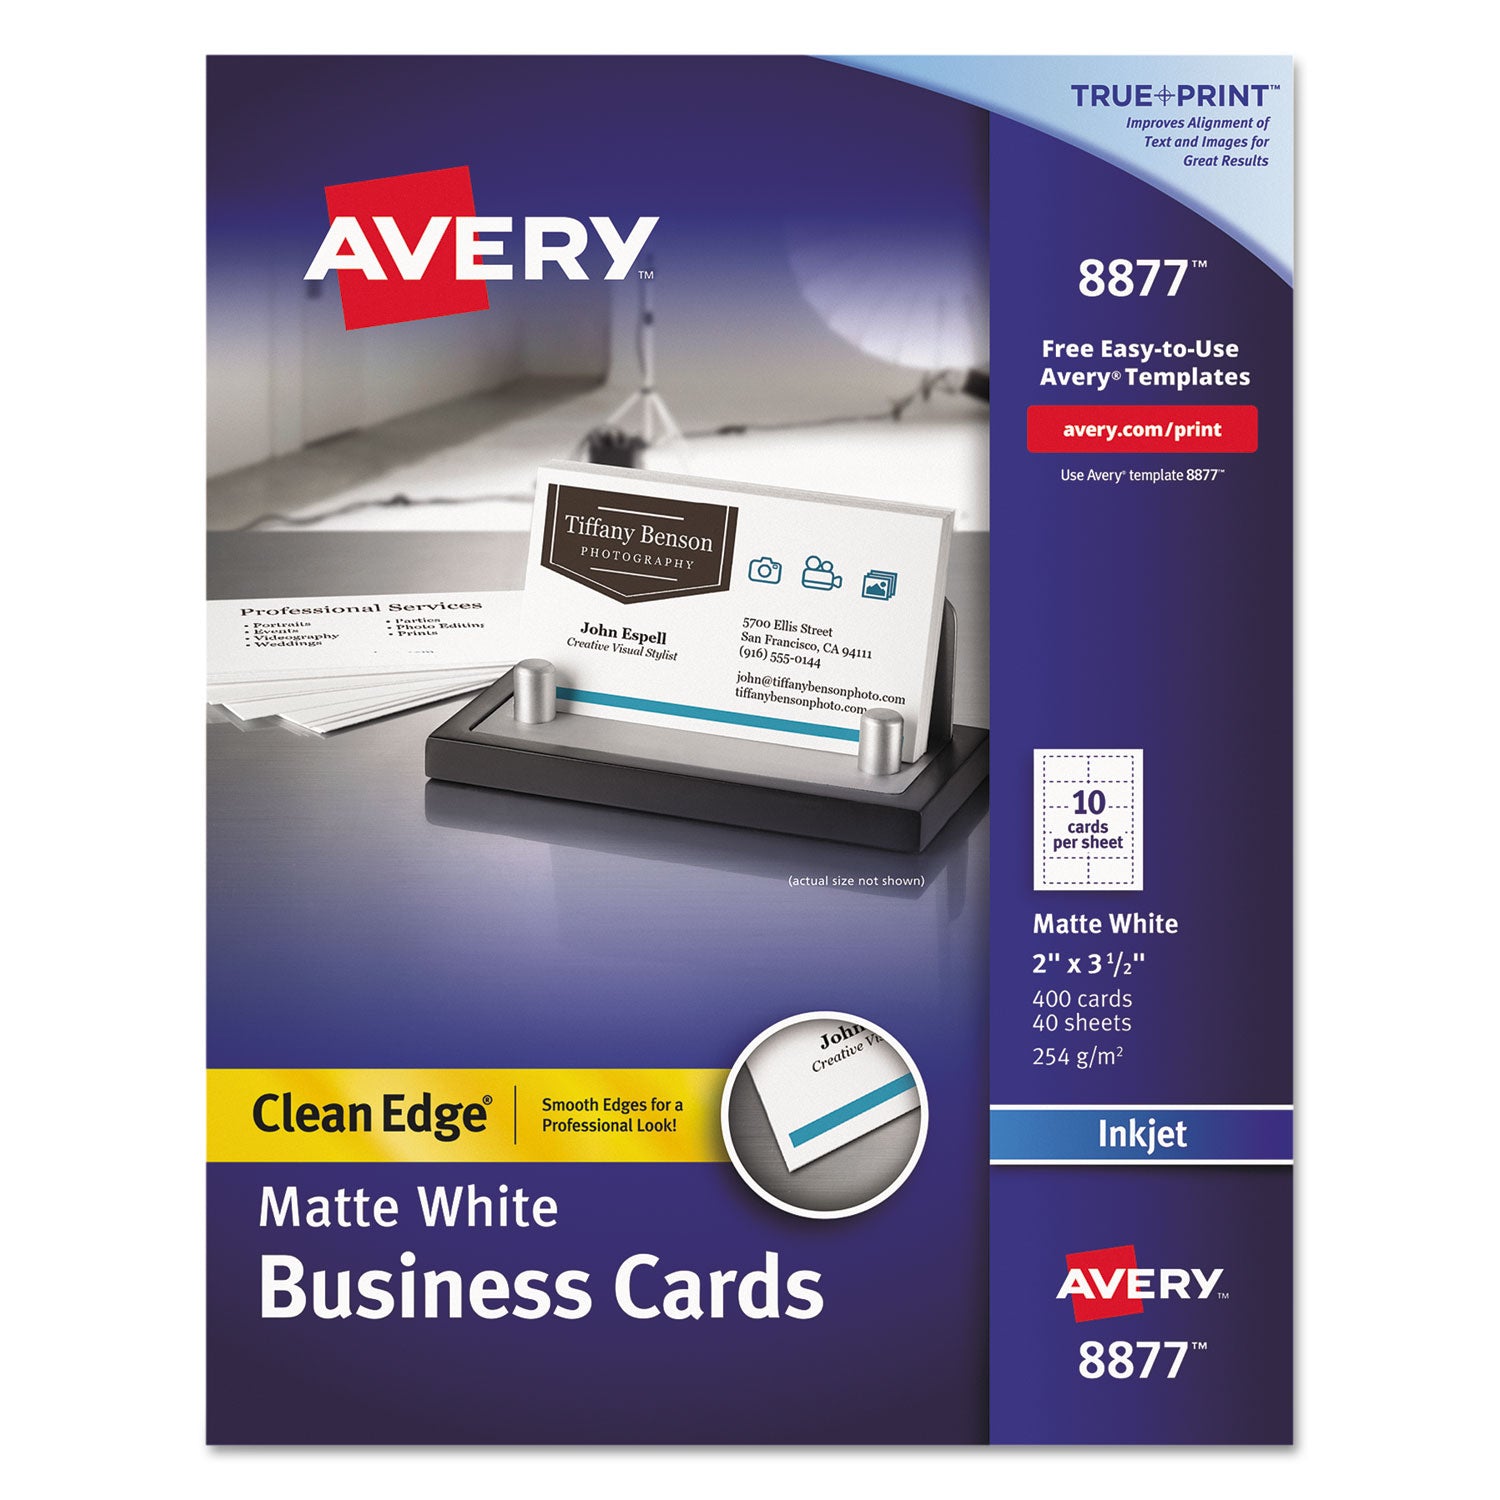 True Print Clean Edge Business Cards, Inkjet, 2 x 3.5, White, 400 Cards, 10 Cards/Sheet, 40 Sheets/Box - 